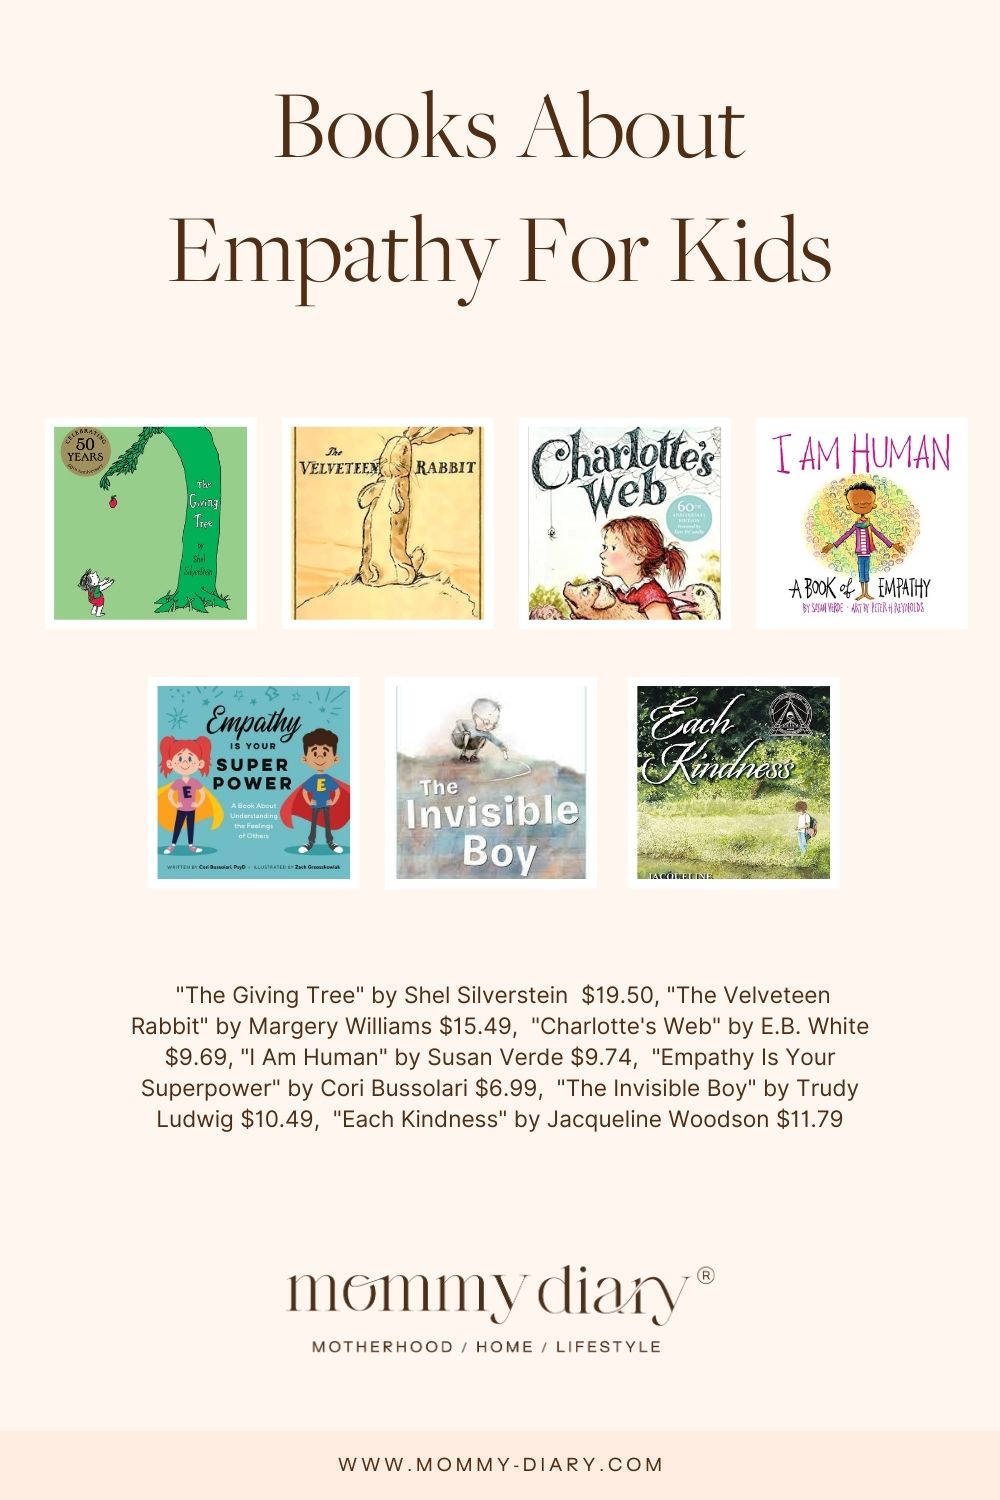 7 Books About Empathy For Kids